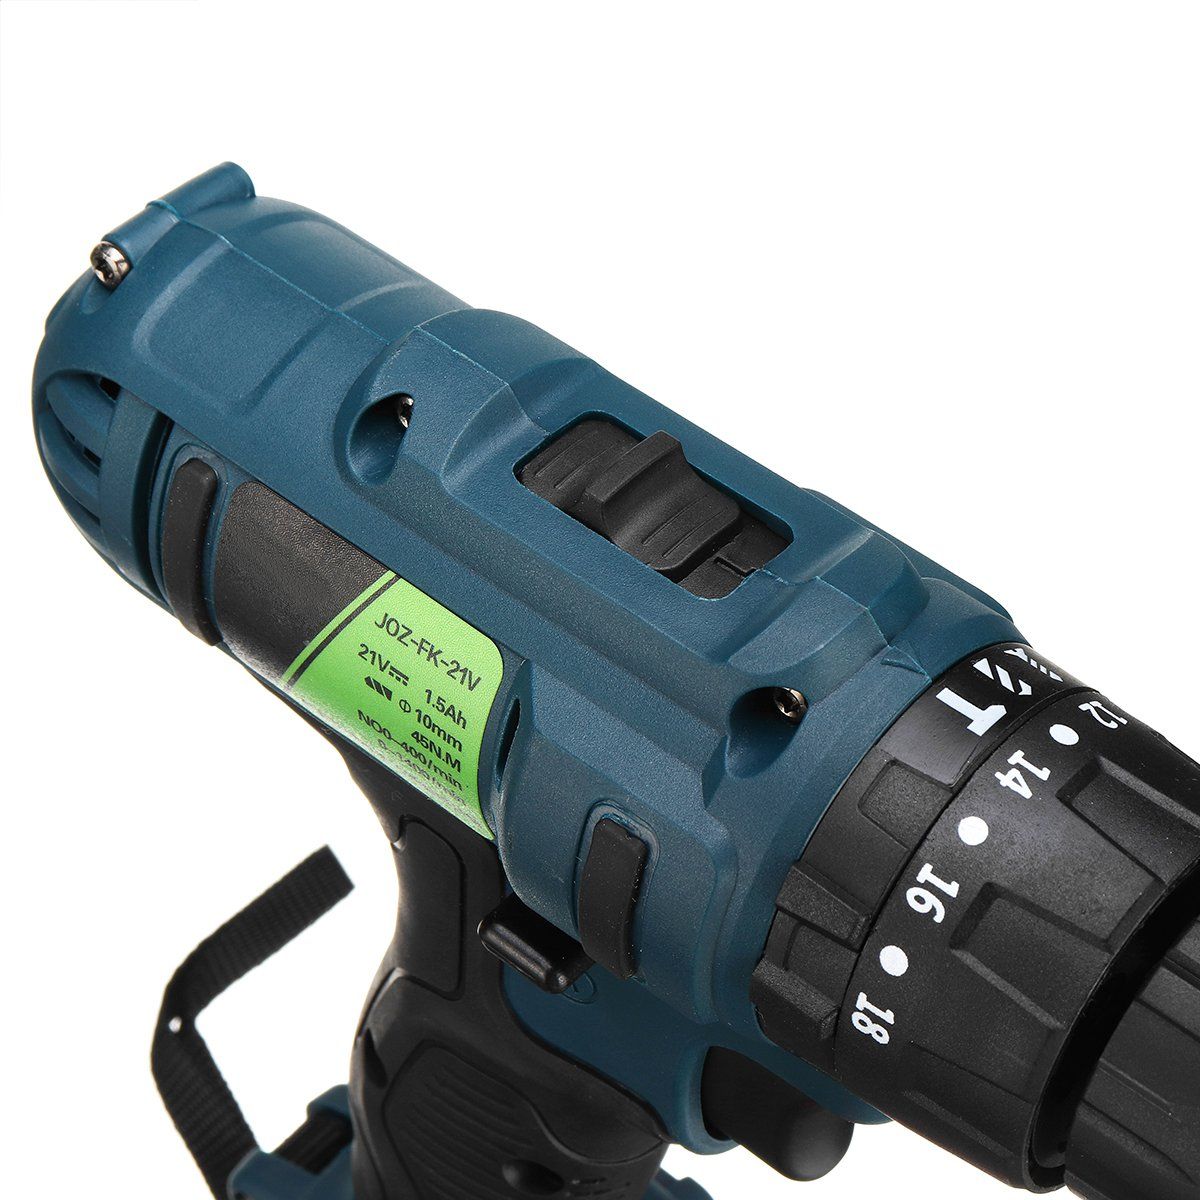 21V-Li-ion-Rechargeable-Battery-Cordless-Power-Impact-Drill-Electric-Screwdriver-1359297